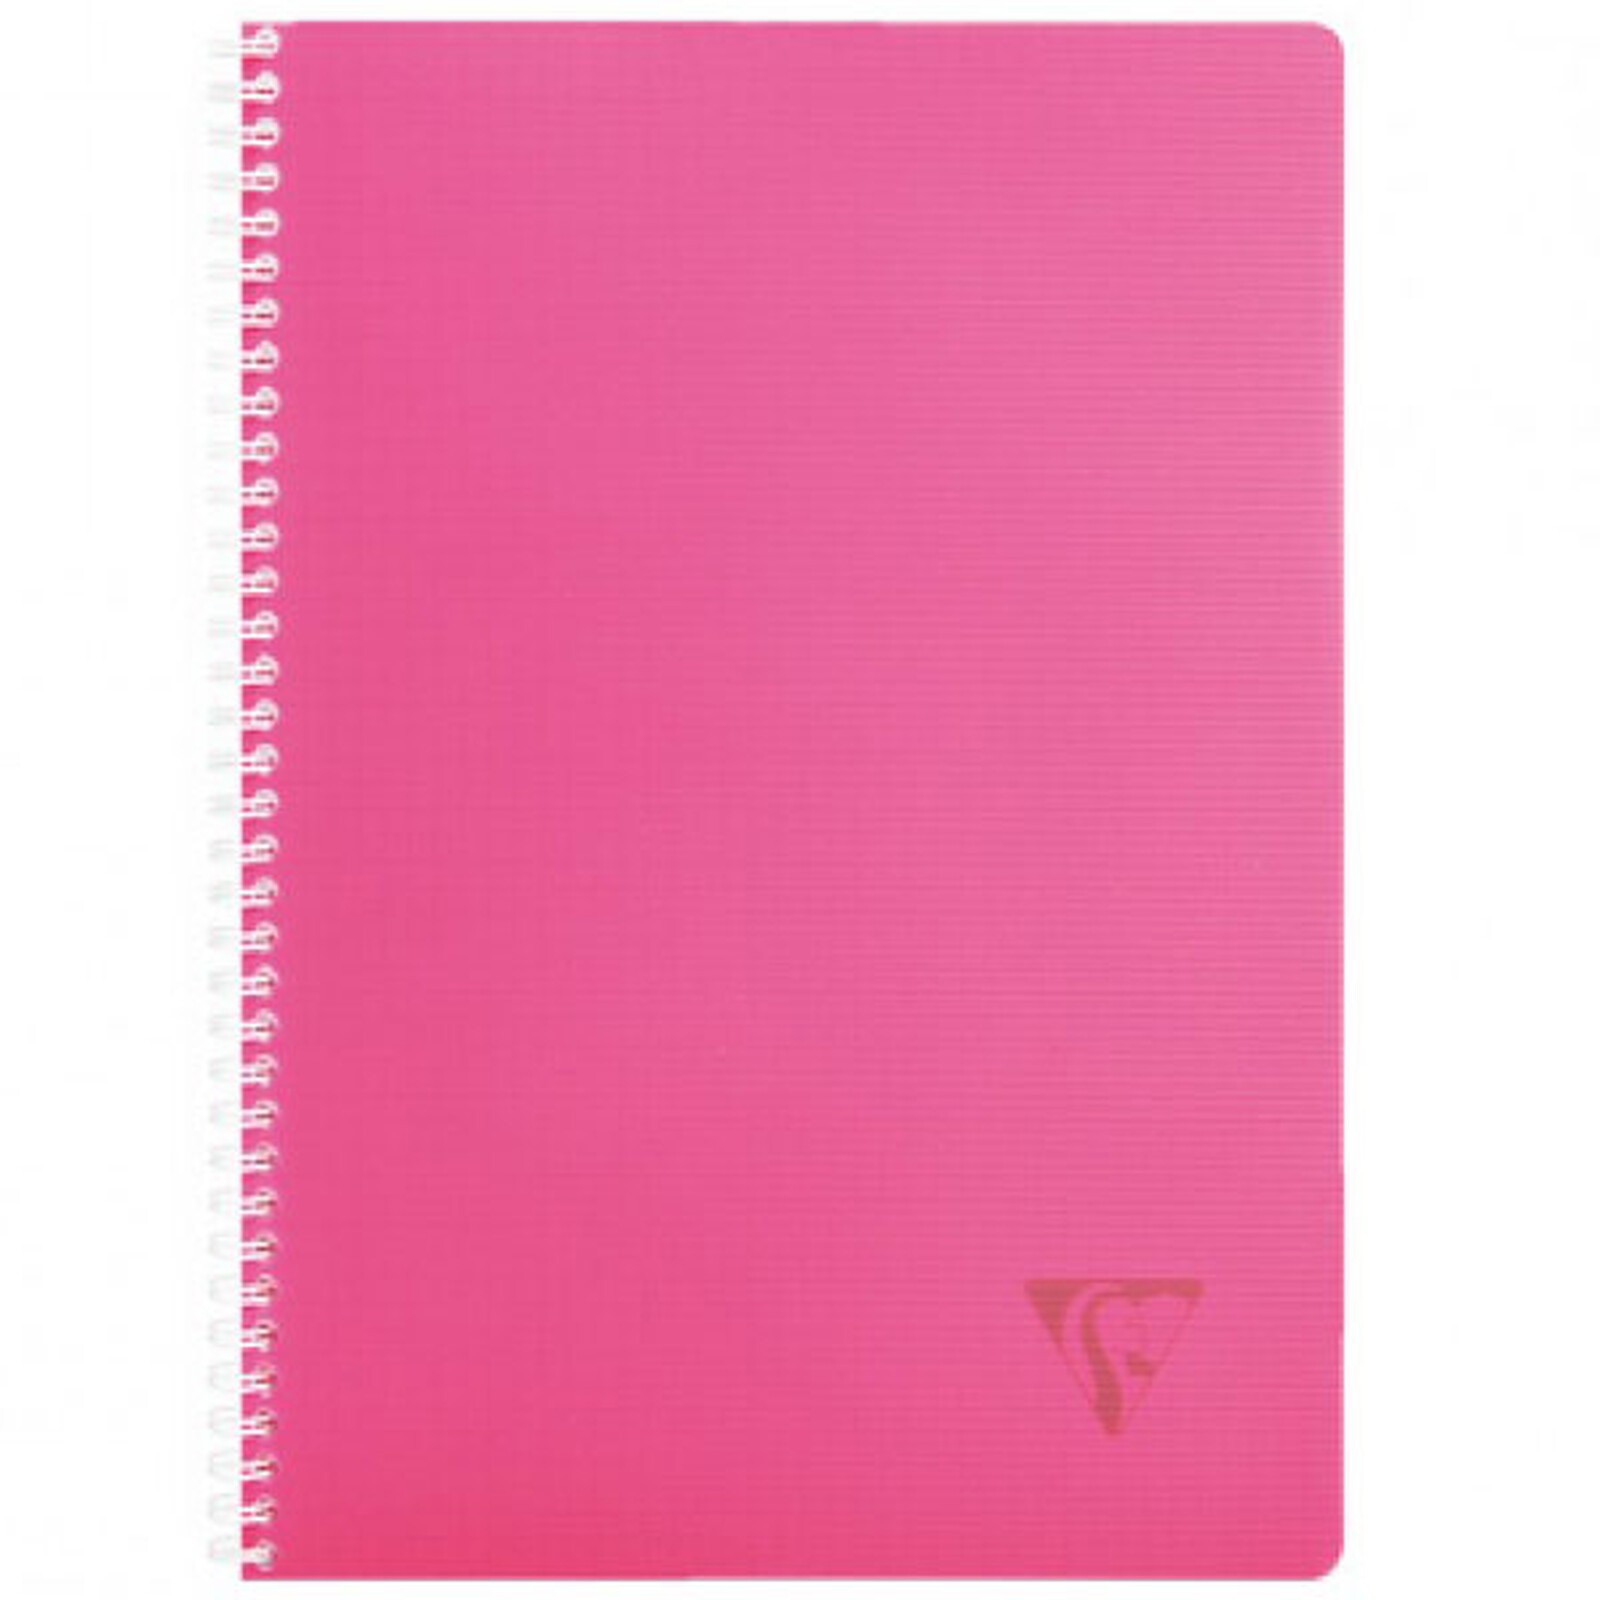 Clairefontaine Zap Book A4 spirale 320 pages 80g - Bloc note - LDLC